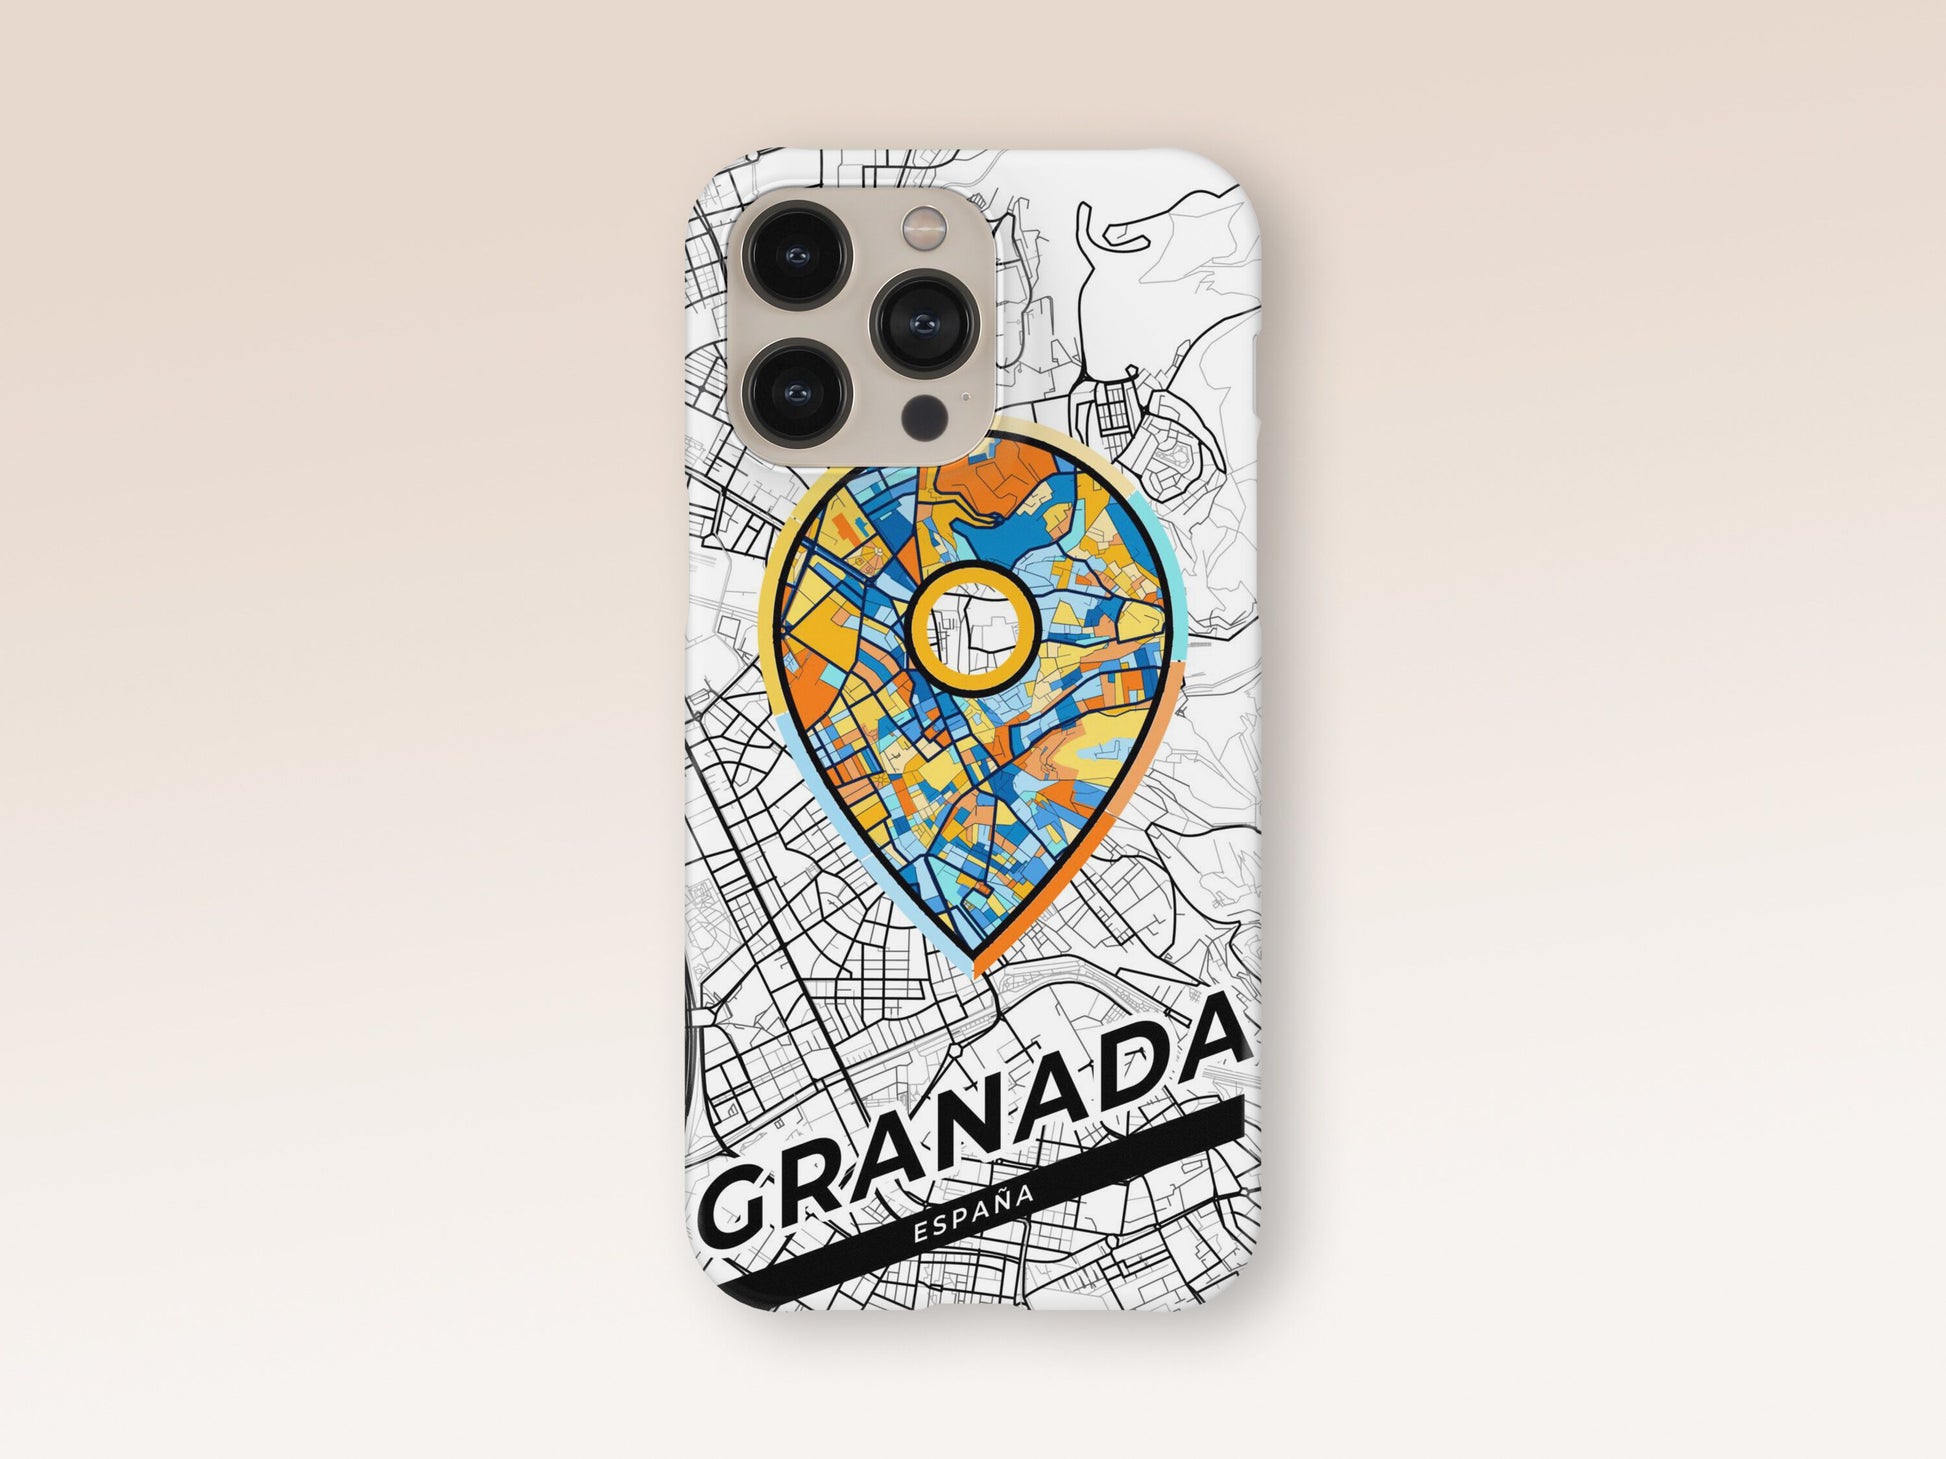 Granada Spain slim phone case with colorful icon. Birthday, wedding or housewarming gift. Couple match cases. 1